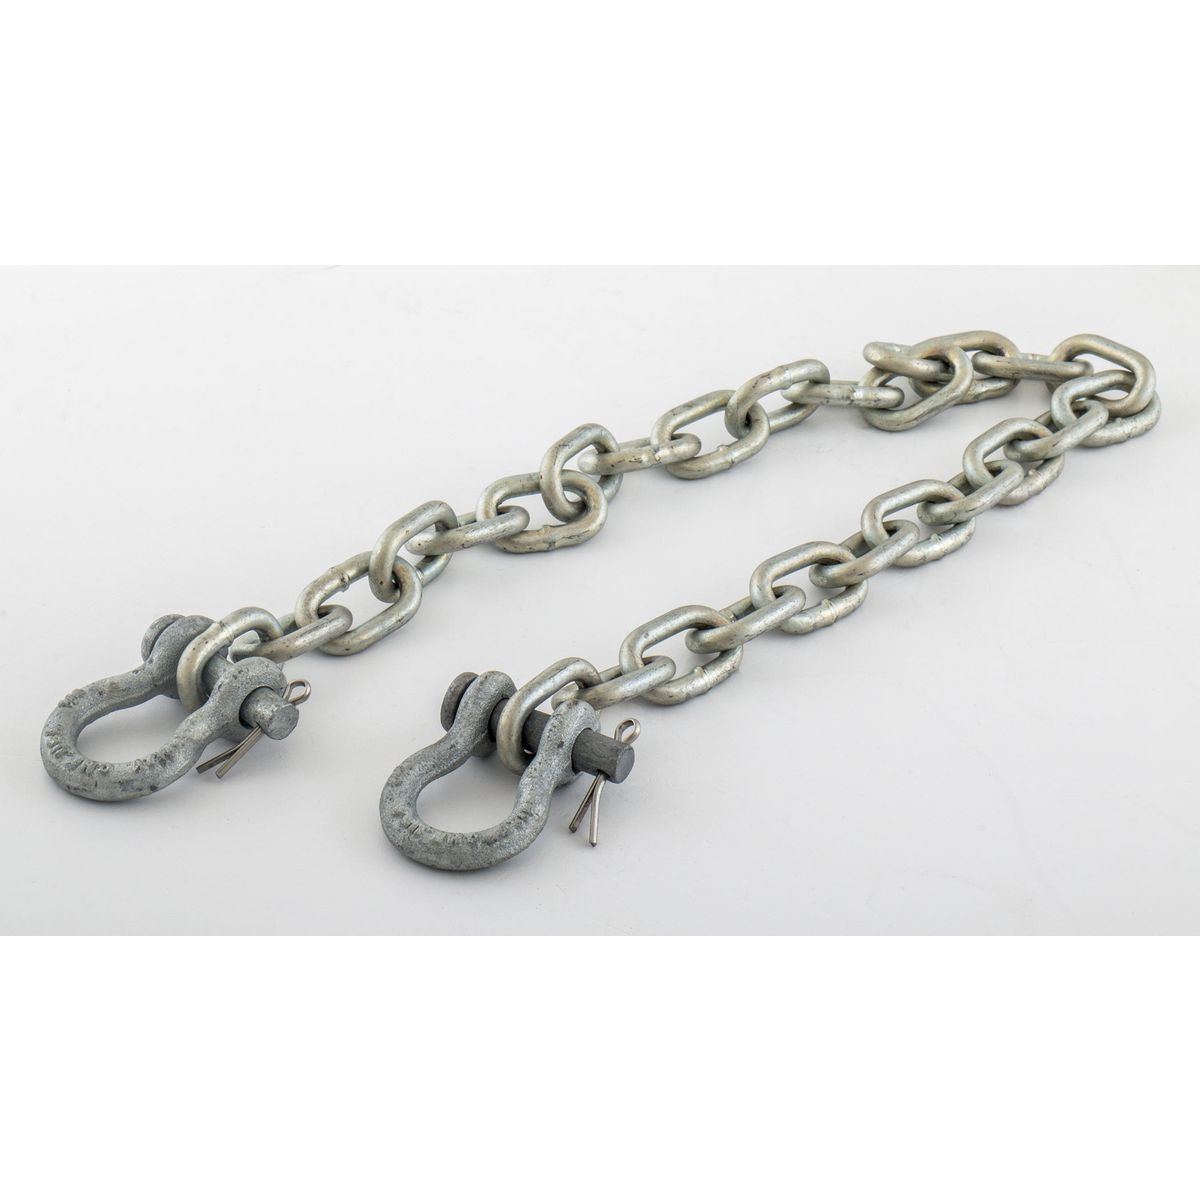 SAFETY CHAIN 3.0 FT LG